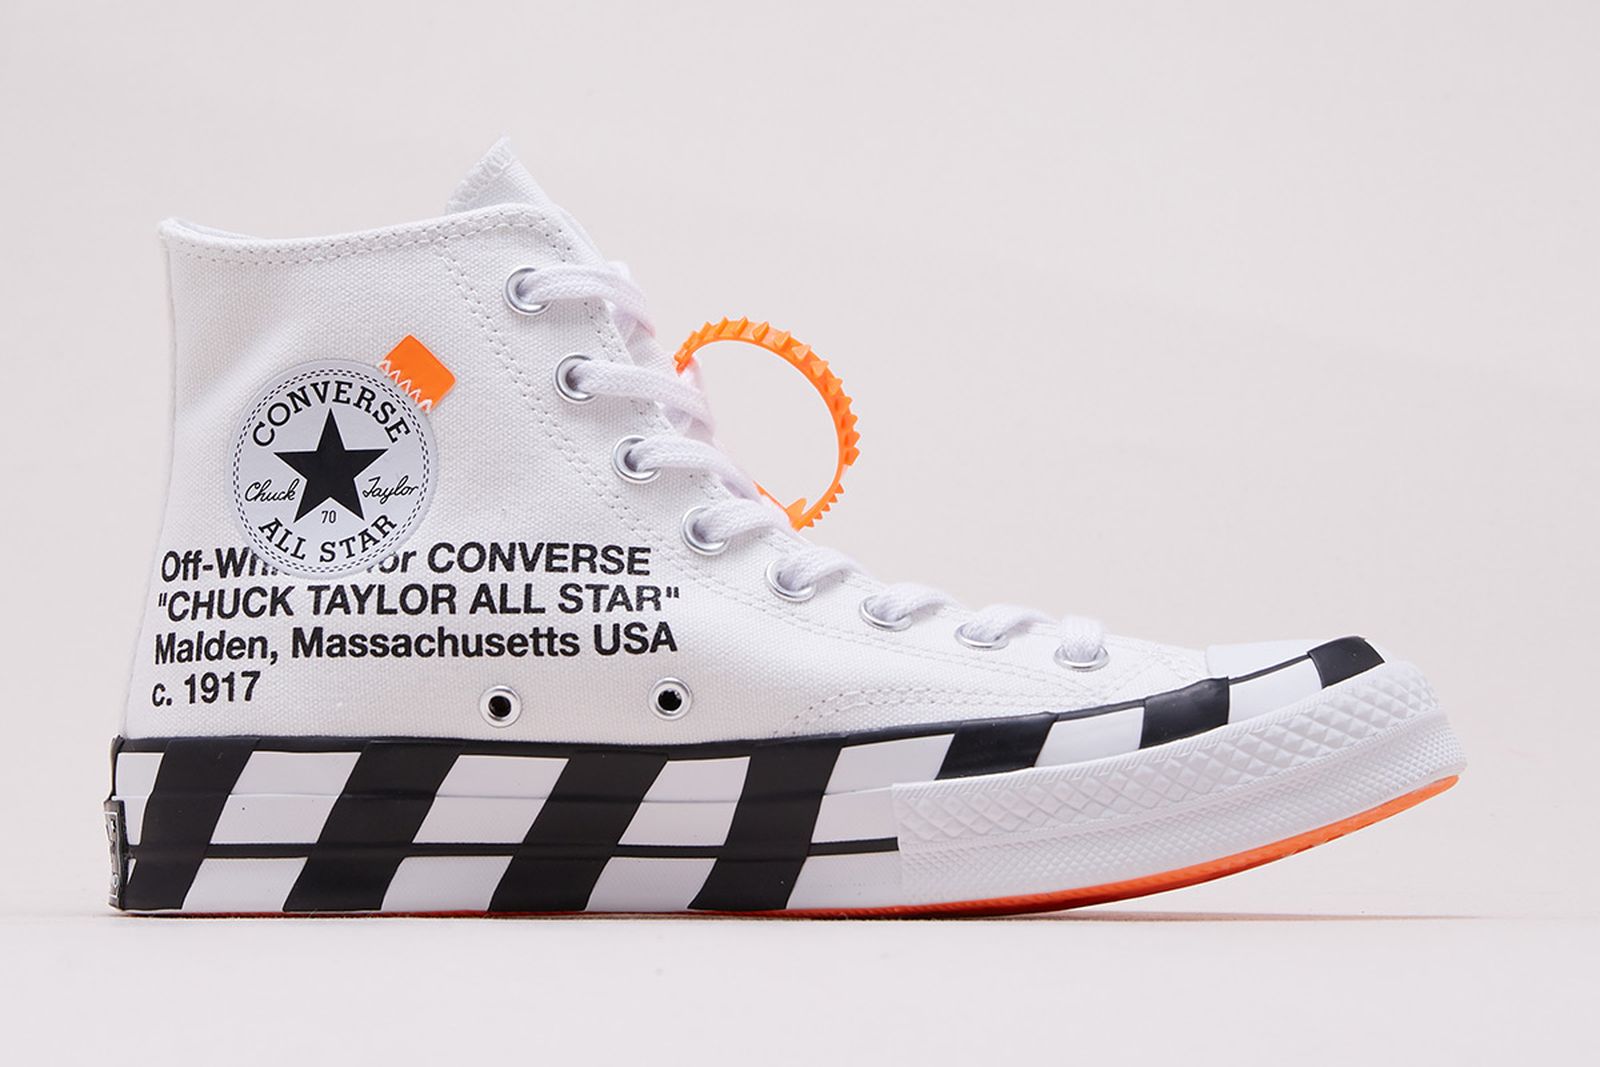 OFF-WHITE x Converse 70: How & to Buy Today